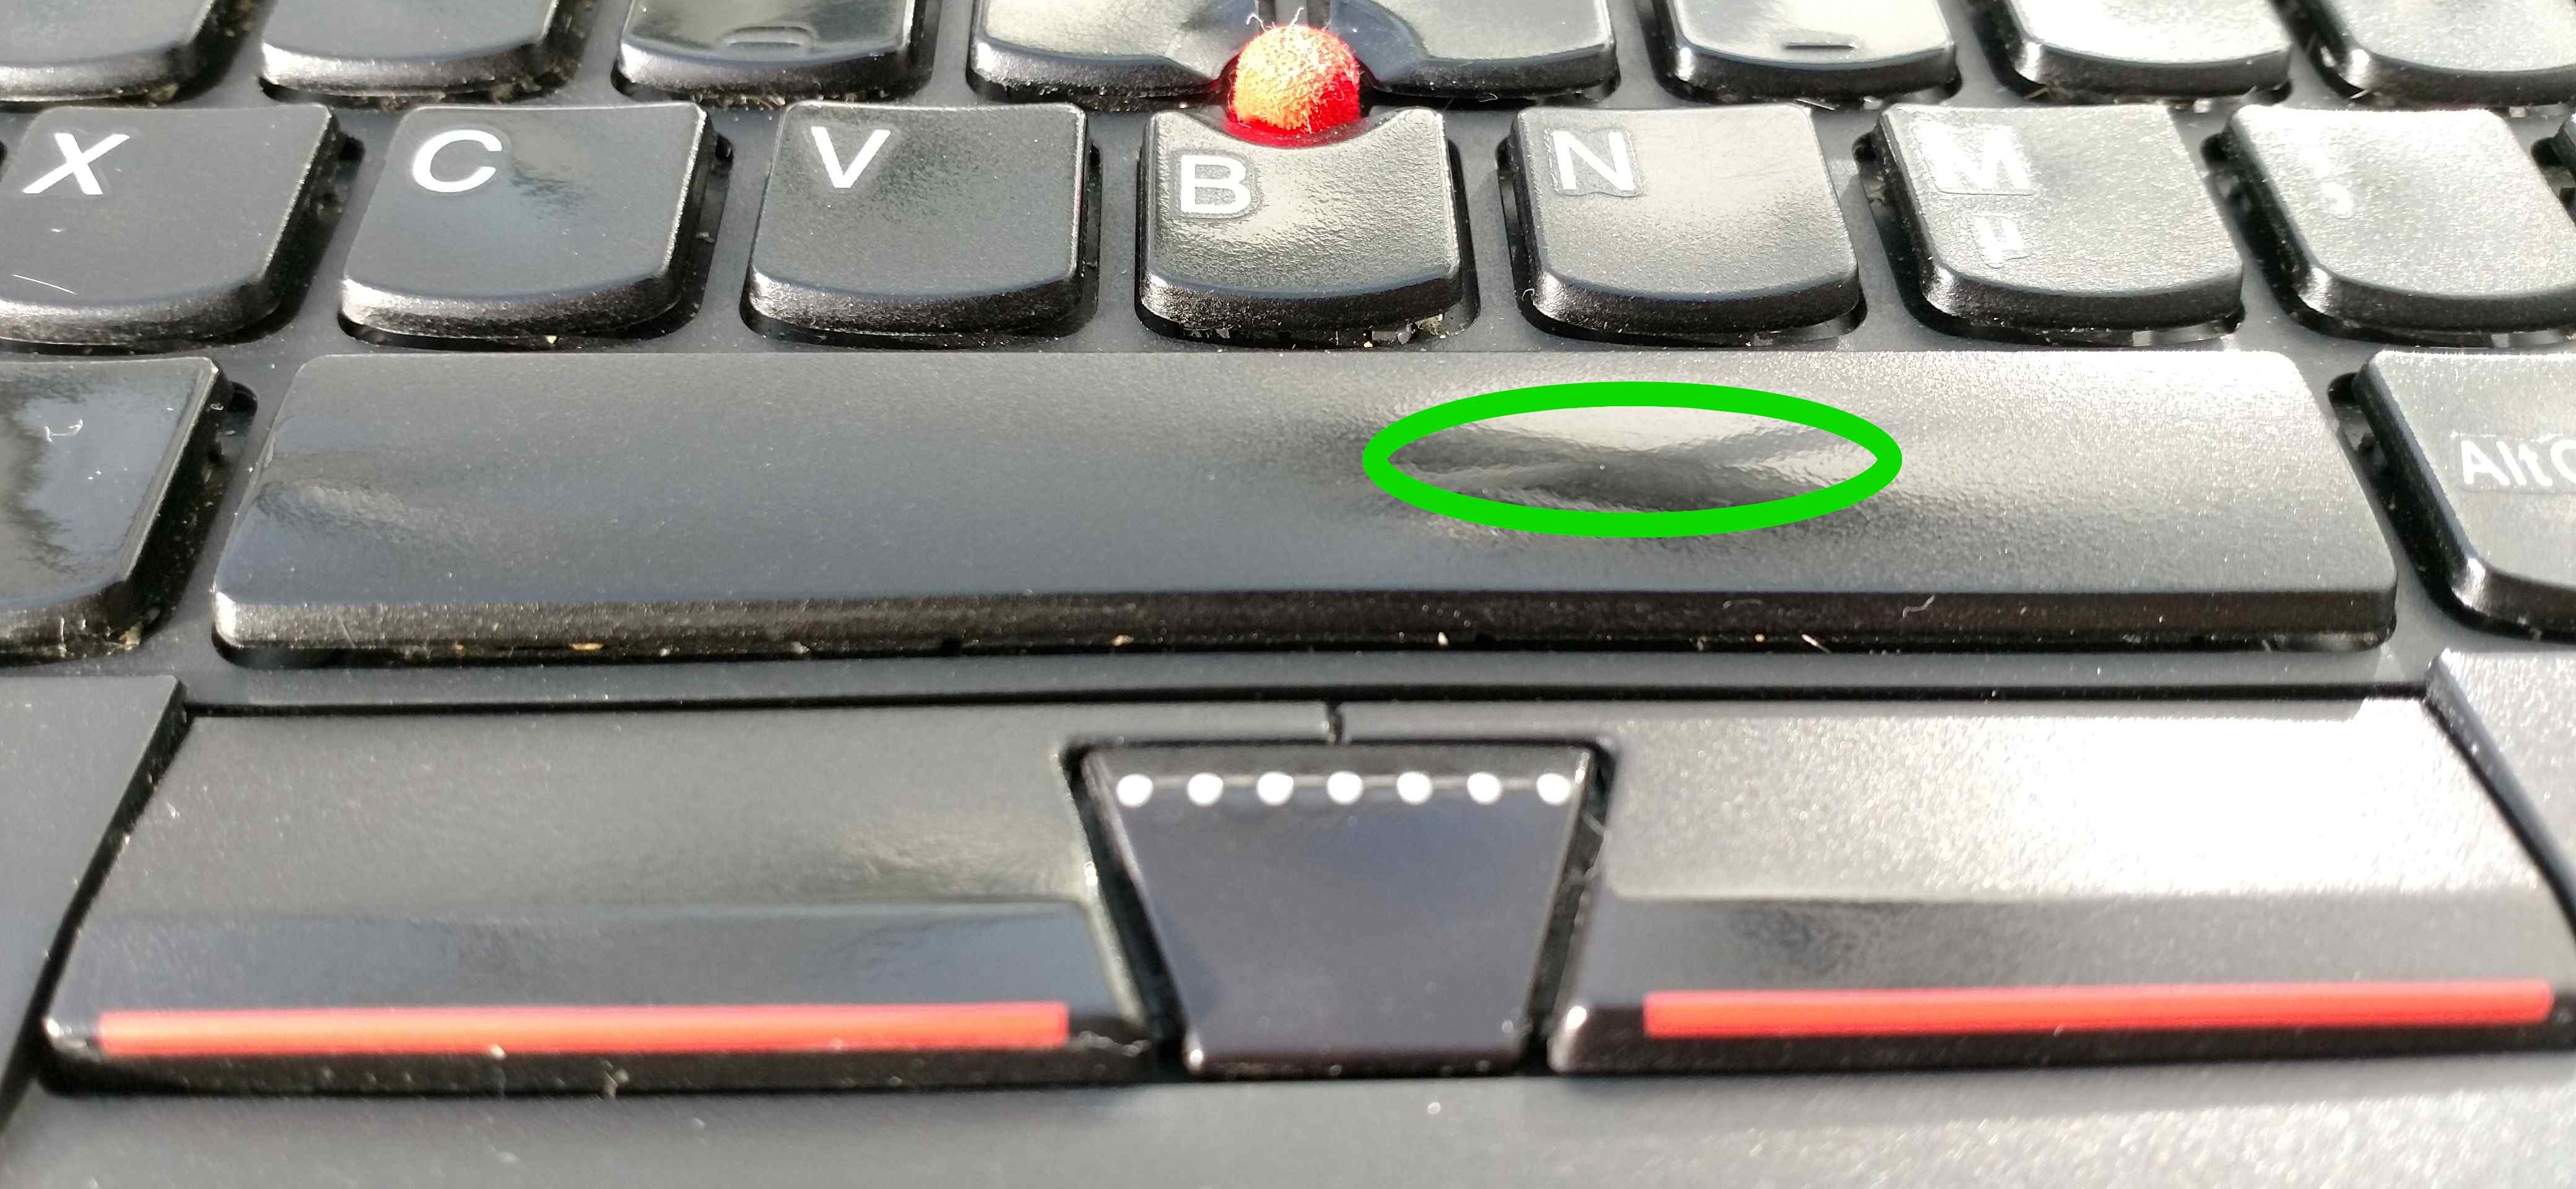 Judging by its wear, I had already been using my space bar as a space key: Almost all wear is concentrated in a small area.